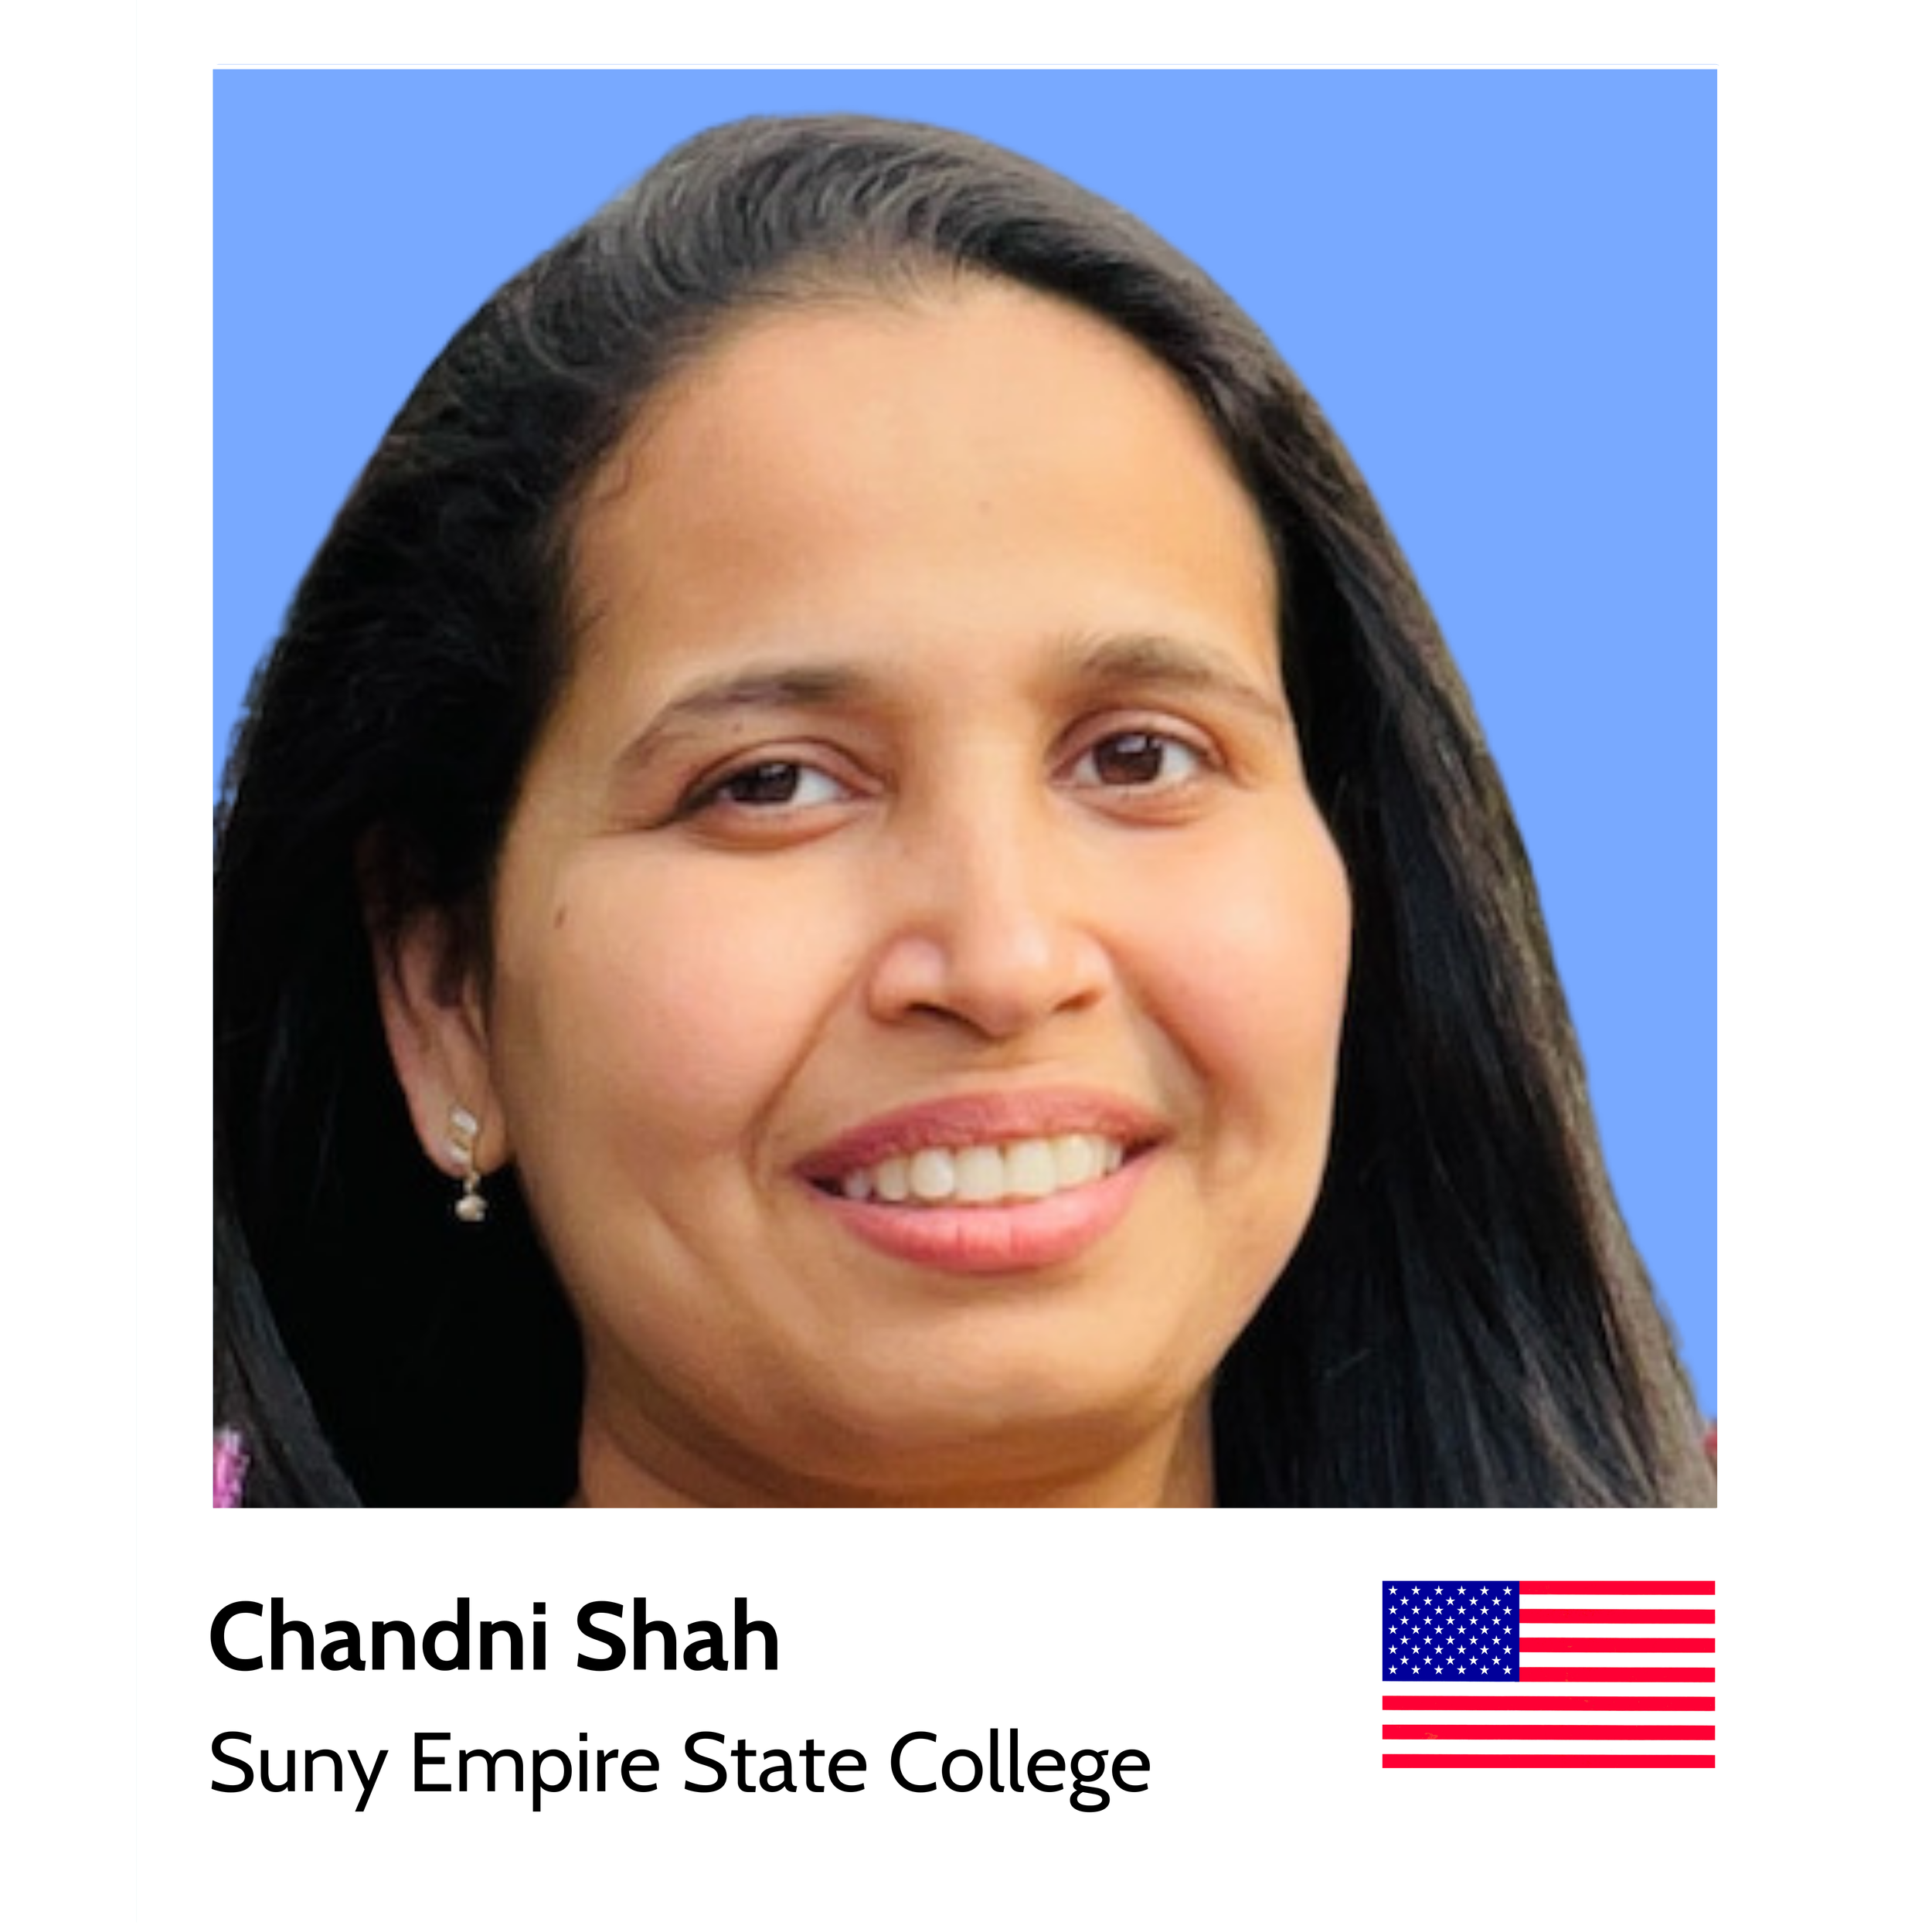 Your_Big_Year_ibm_zsystems_ambassador_ Chandni_Shah_Suny_Empire_State_College.png